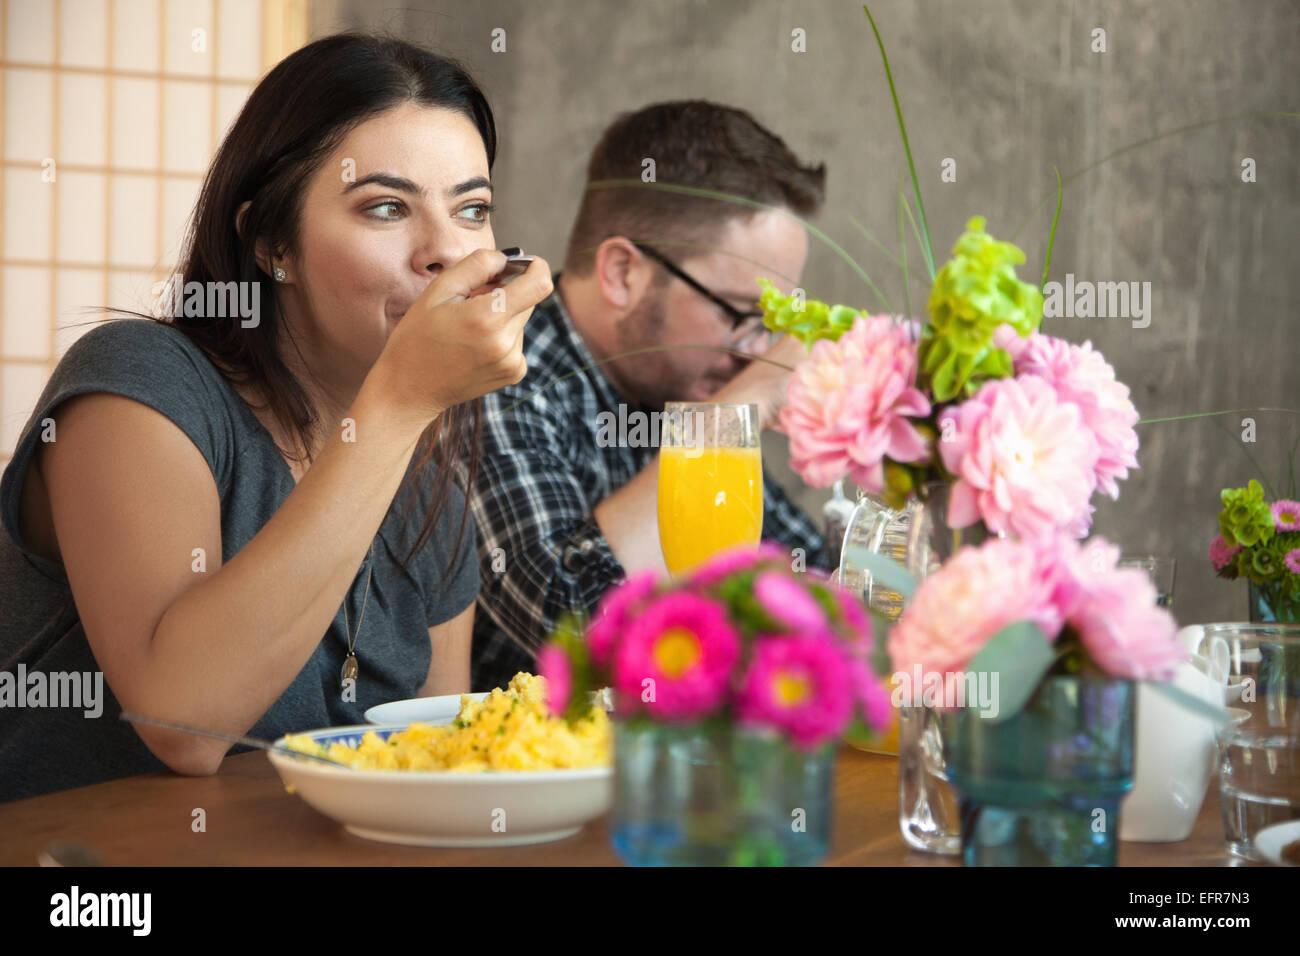 Friends at dinner table eating meal Stock Photo